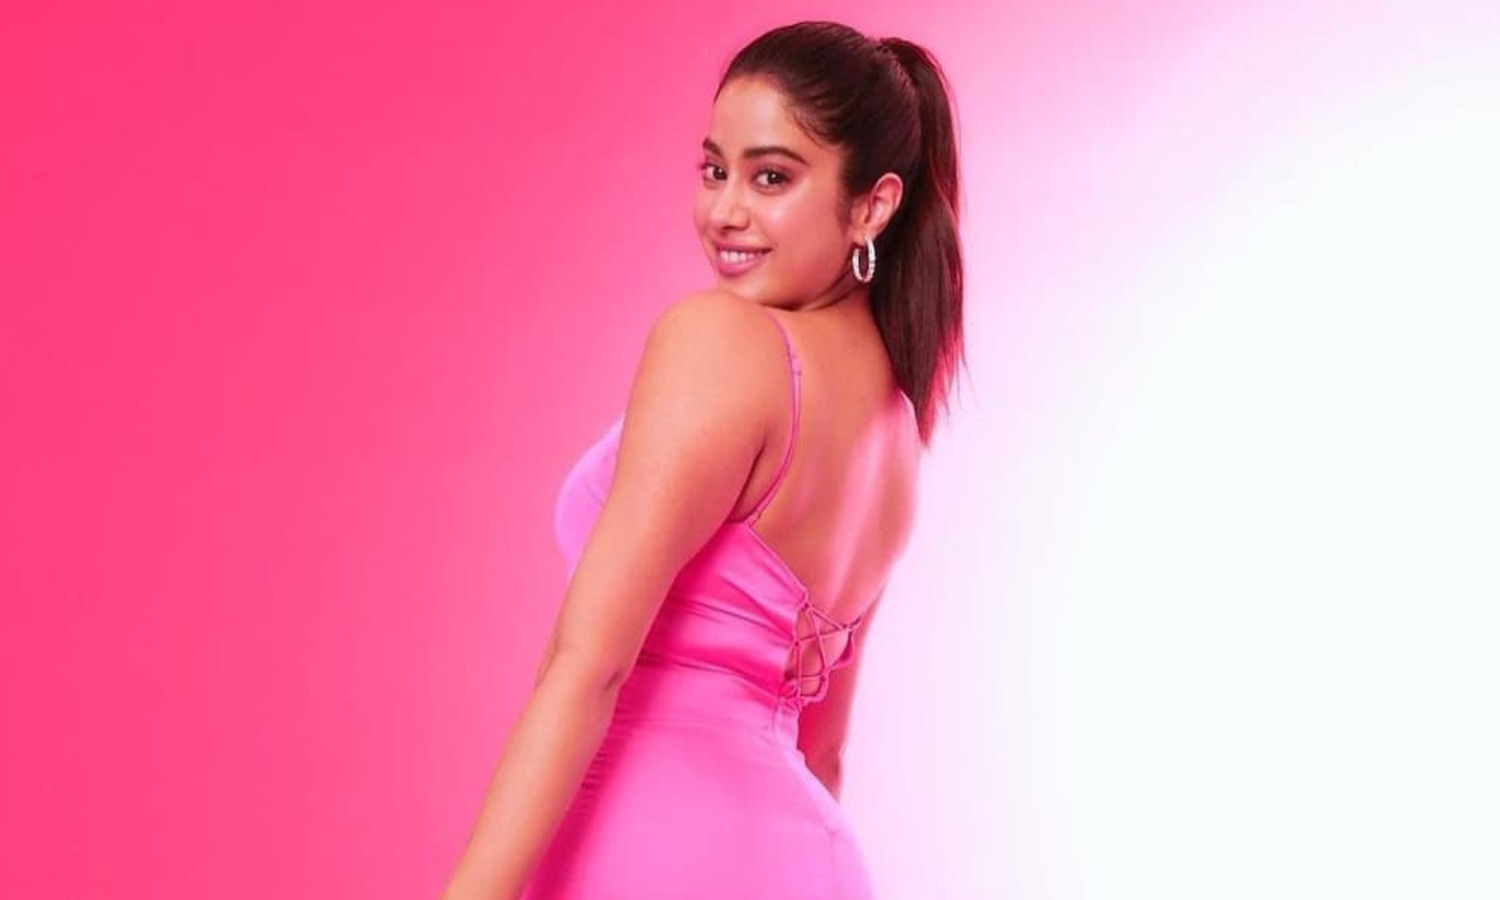 Jahnvi Kapoor: Jhanvi Kapoor’s film "good luck jerry" Why did I feel proud of this heroine?